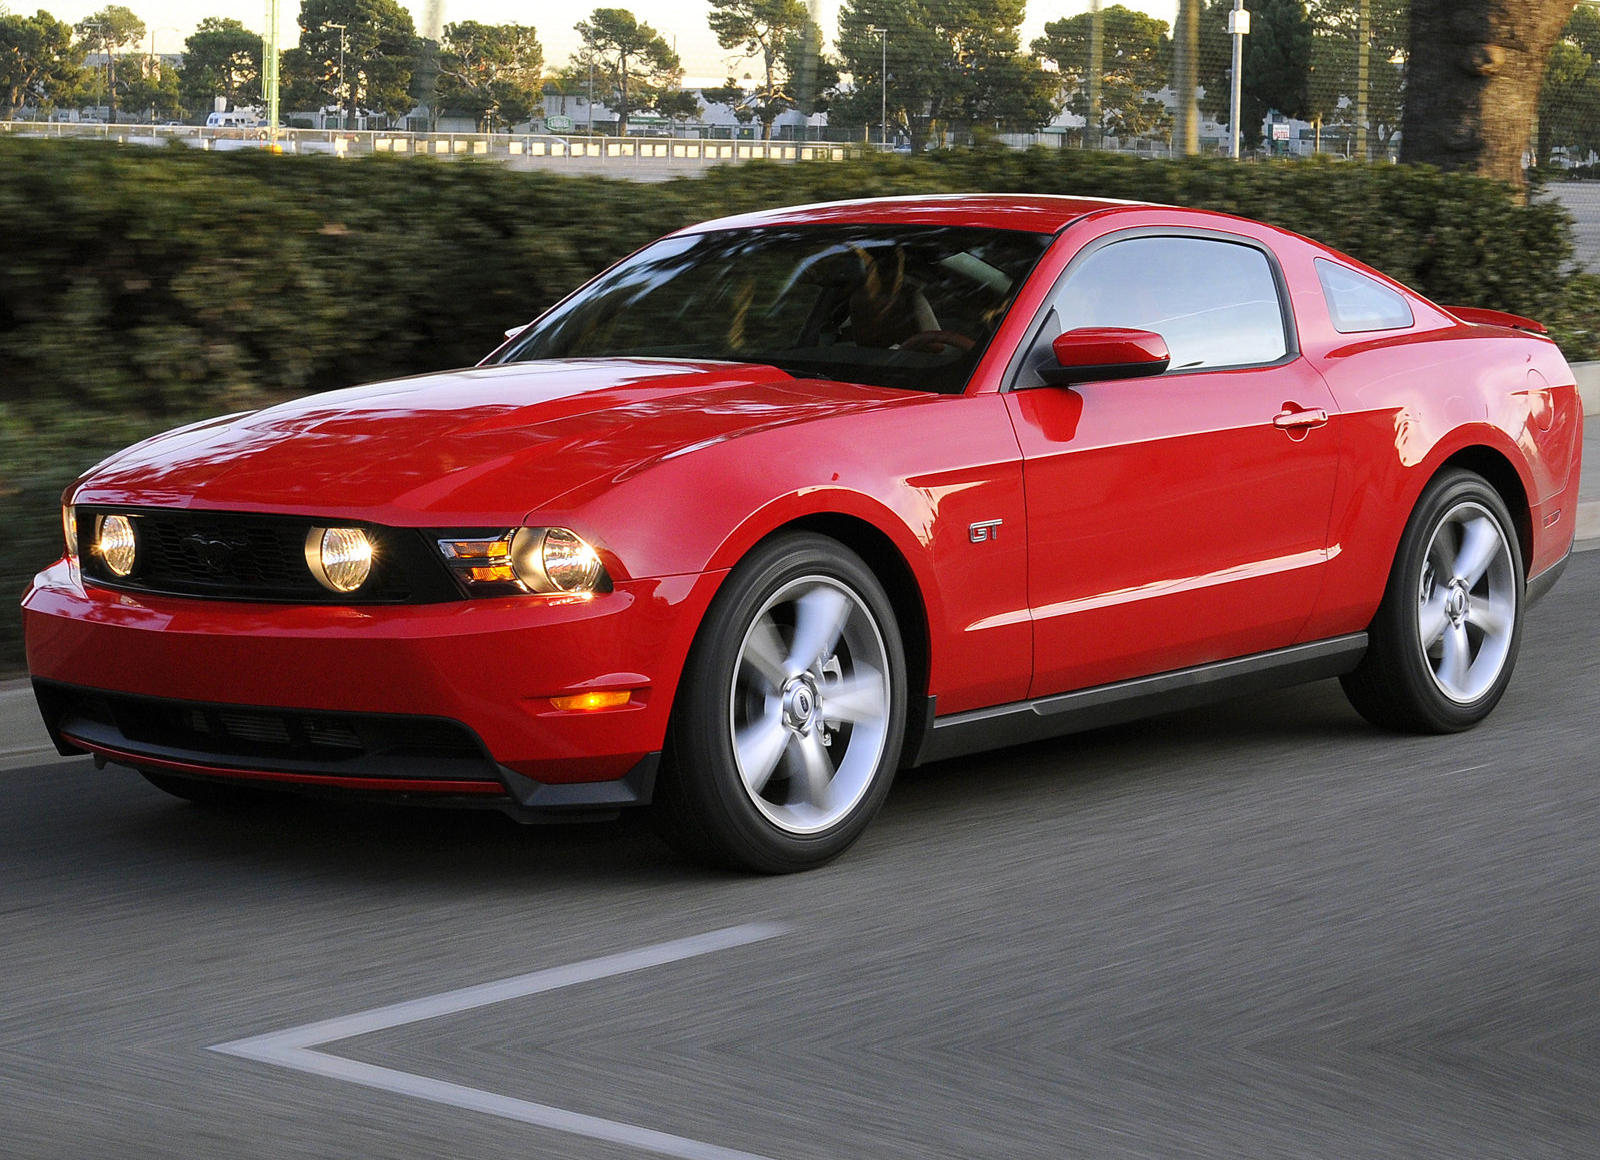 2013 Ford Mustang Coupe Review, Trims, Specs, Price, New